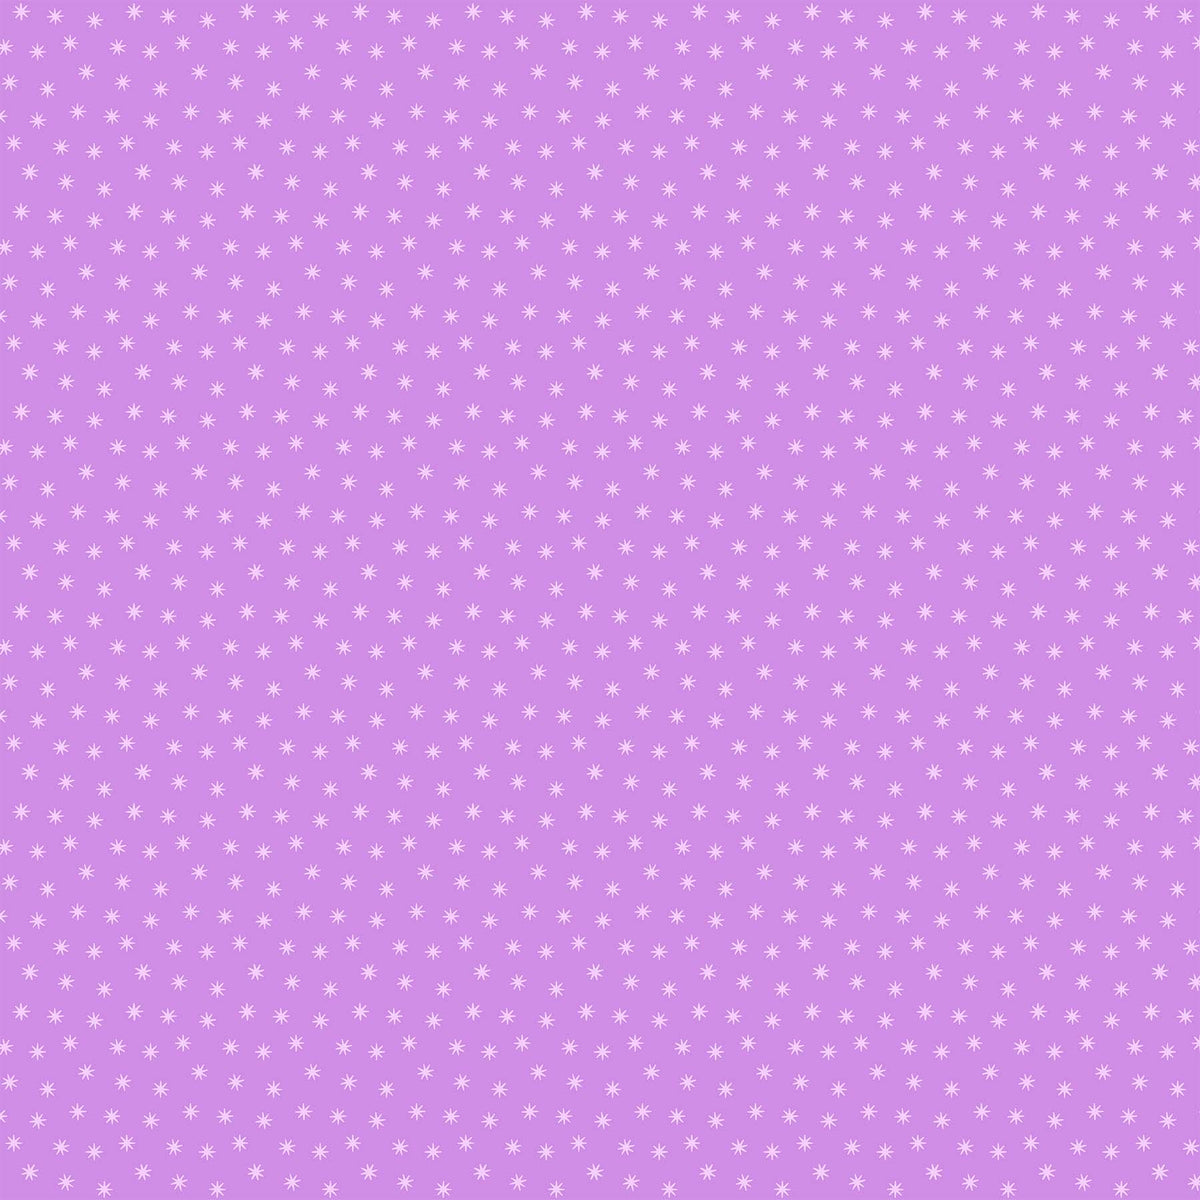 Happiness Quilt Fabric - Pinwheel in Lilac Purple - 90599-80